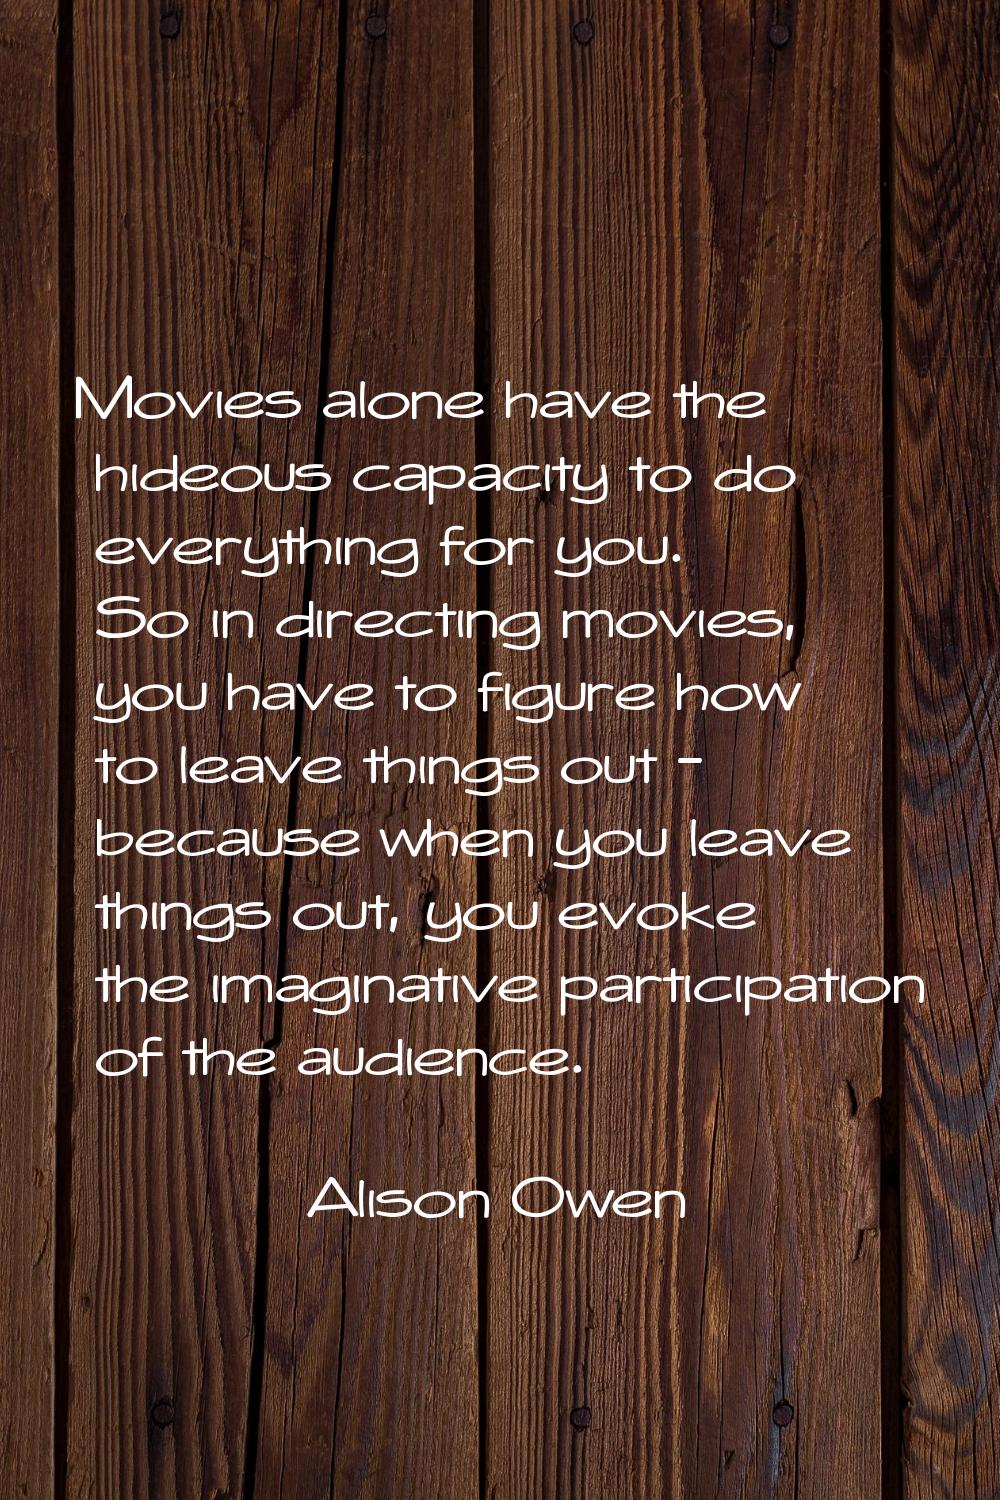 Movies alone have the hideous capacity to do everything for you. So in directing movies, you have t